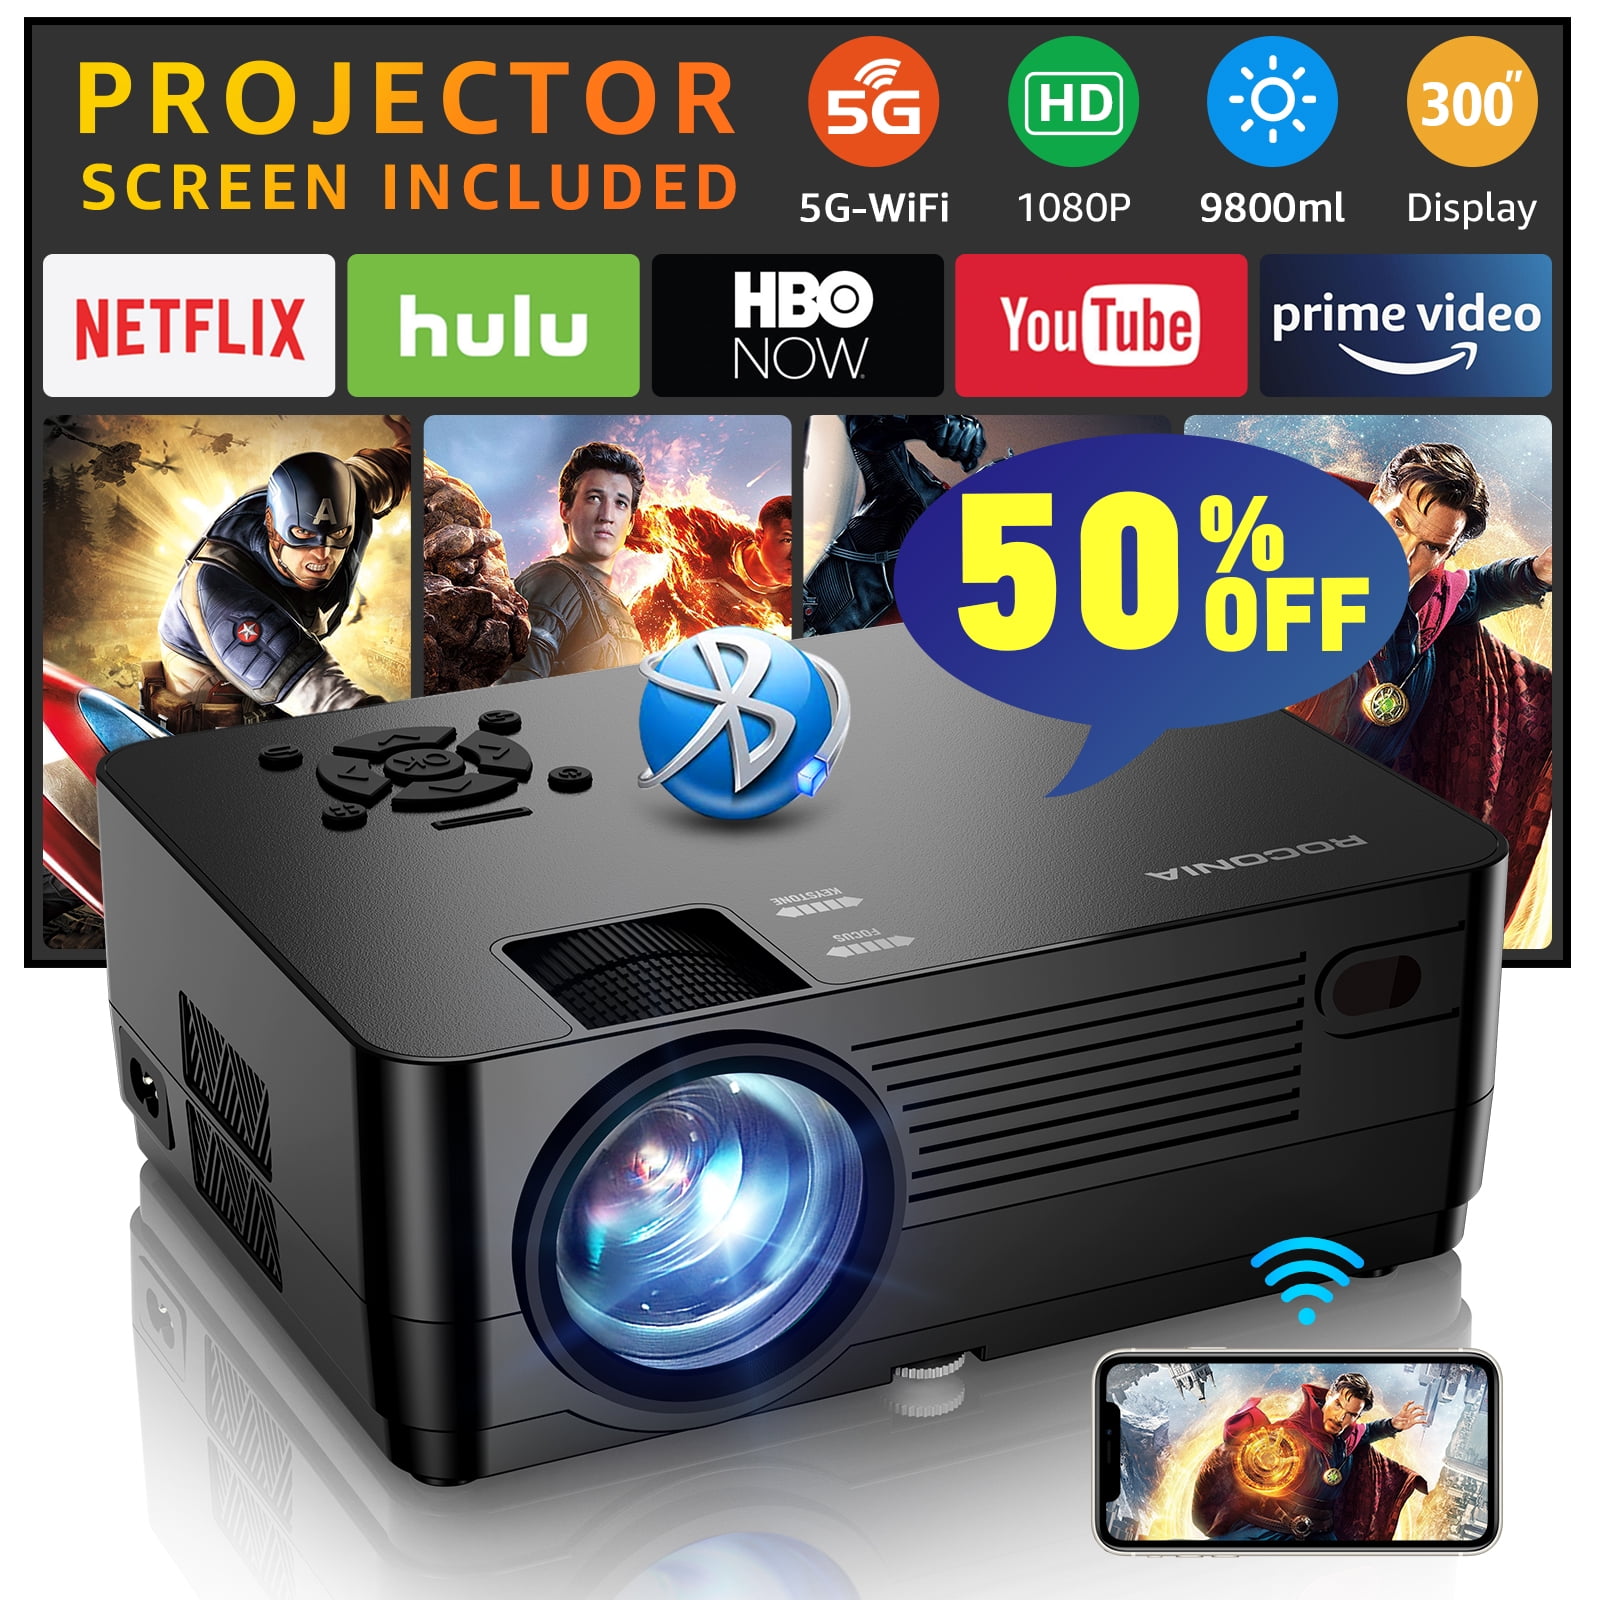 ROCONIA 5G WiFi Bluetooth Native 1080P Projector, 9800LM Full HD Movie Projector, LCD Technology 300" Display Support 4k Home Theater,(Projector Screen Included)